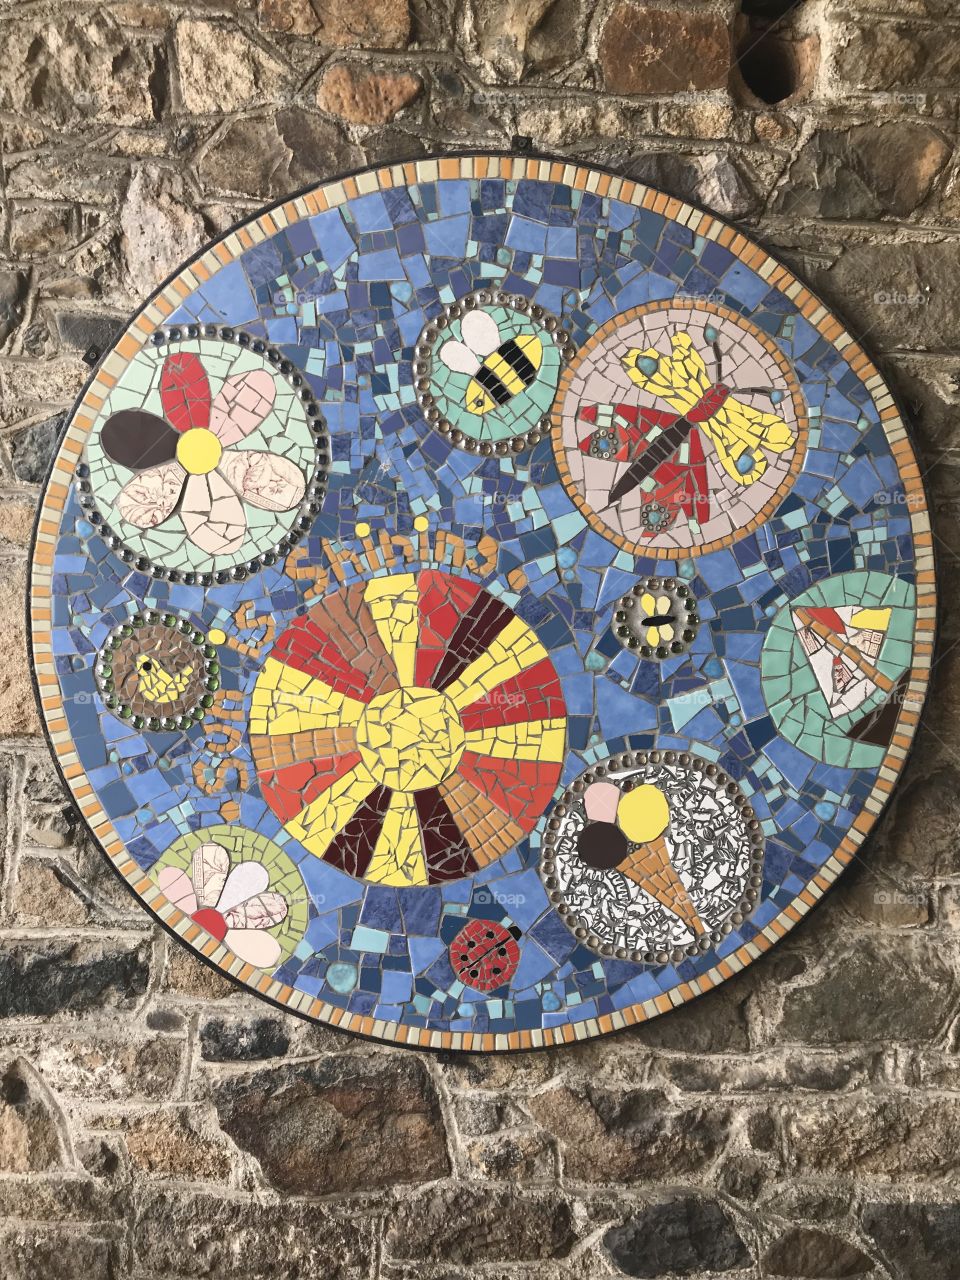 This mosaic appears to focus on creating art via shapes,  The outcome leaves the viewer an opportunity to imagine what the artists thoughts were. what do you think?